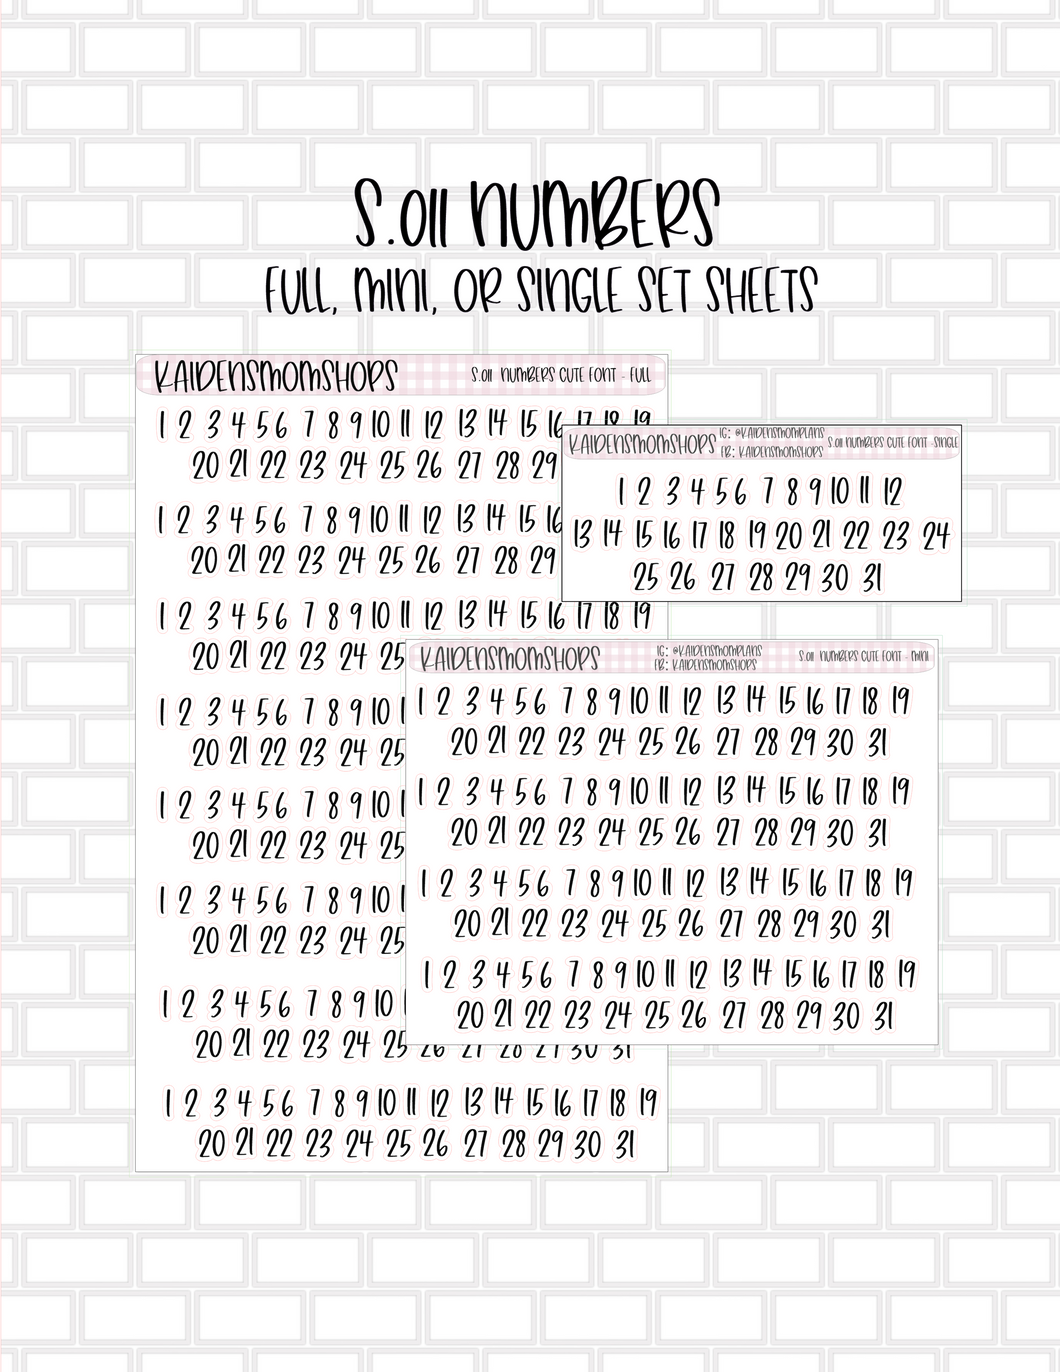 S.011 Numbers Print Stickers